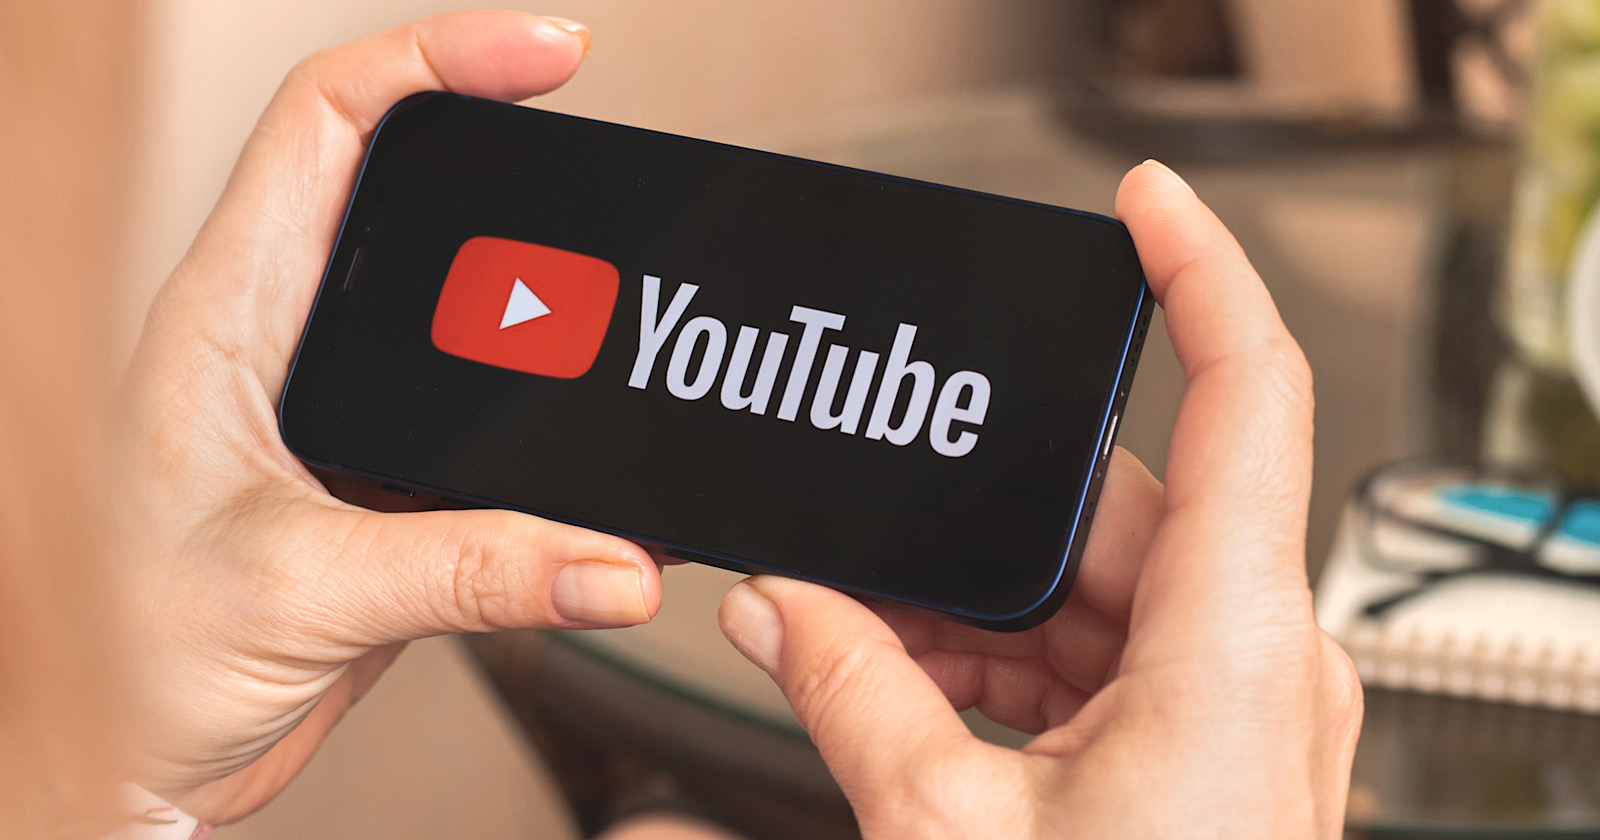 YouTube is about to get VERY aggressive with ad blockers